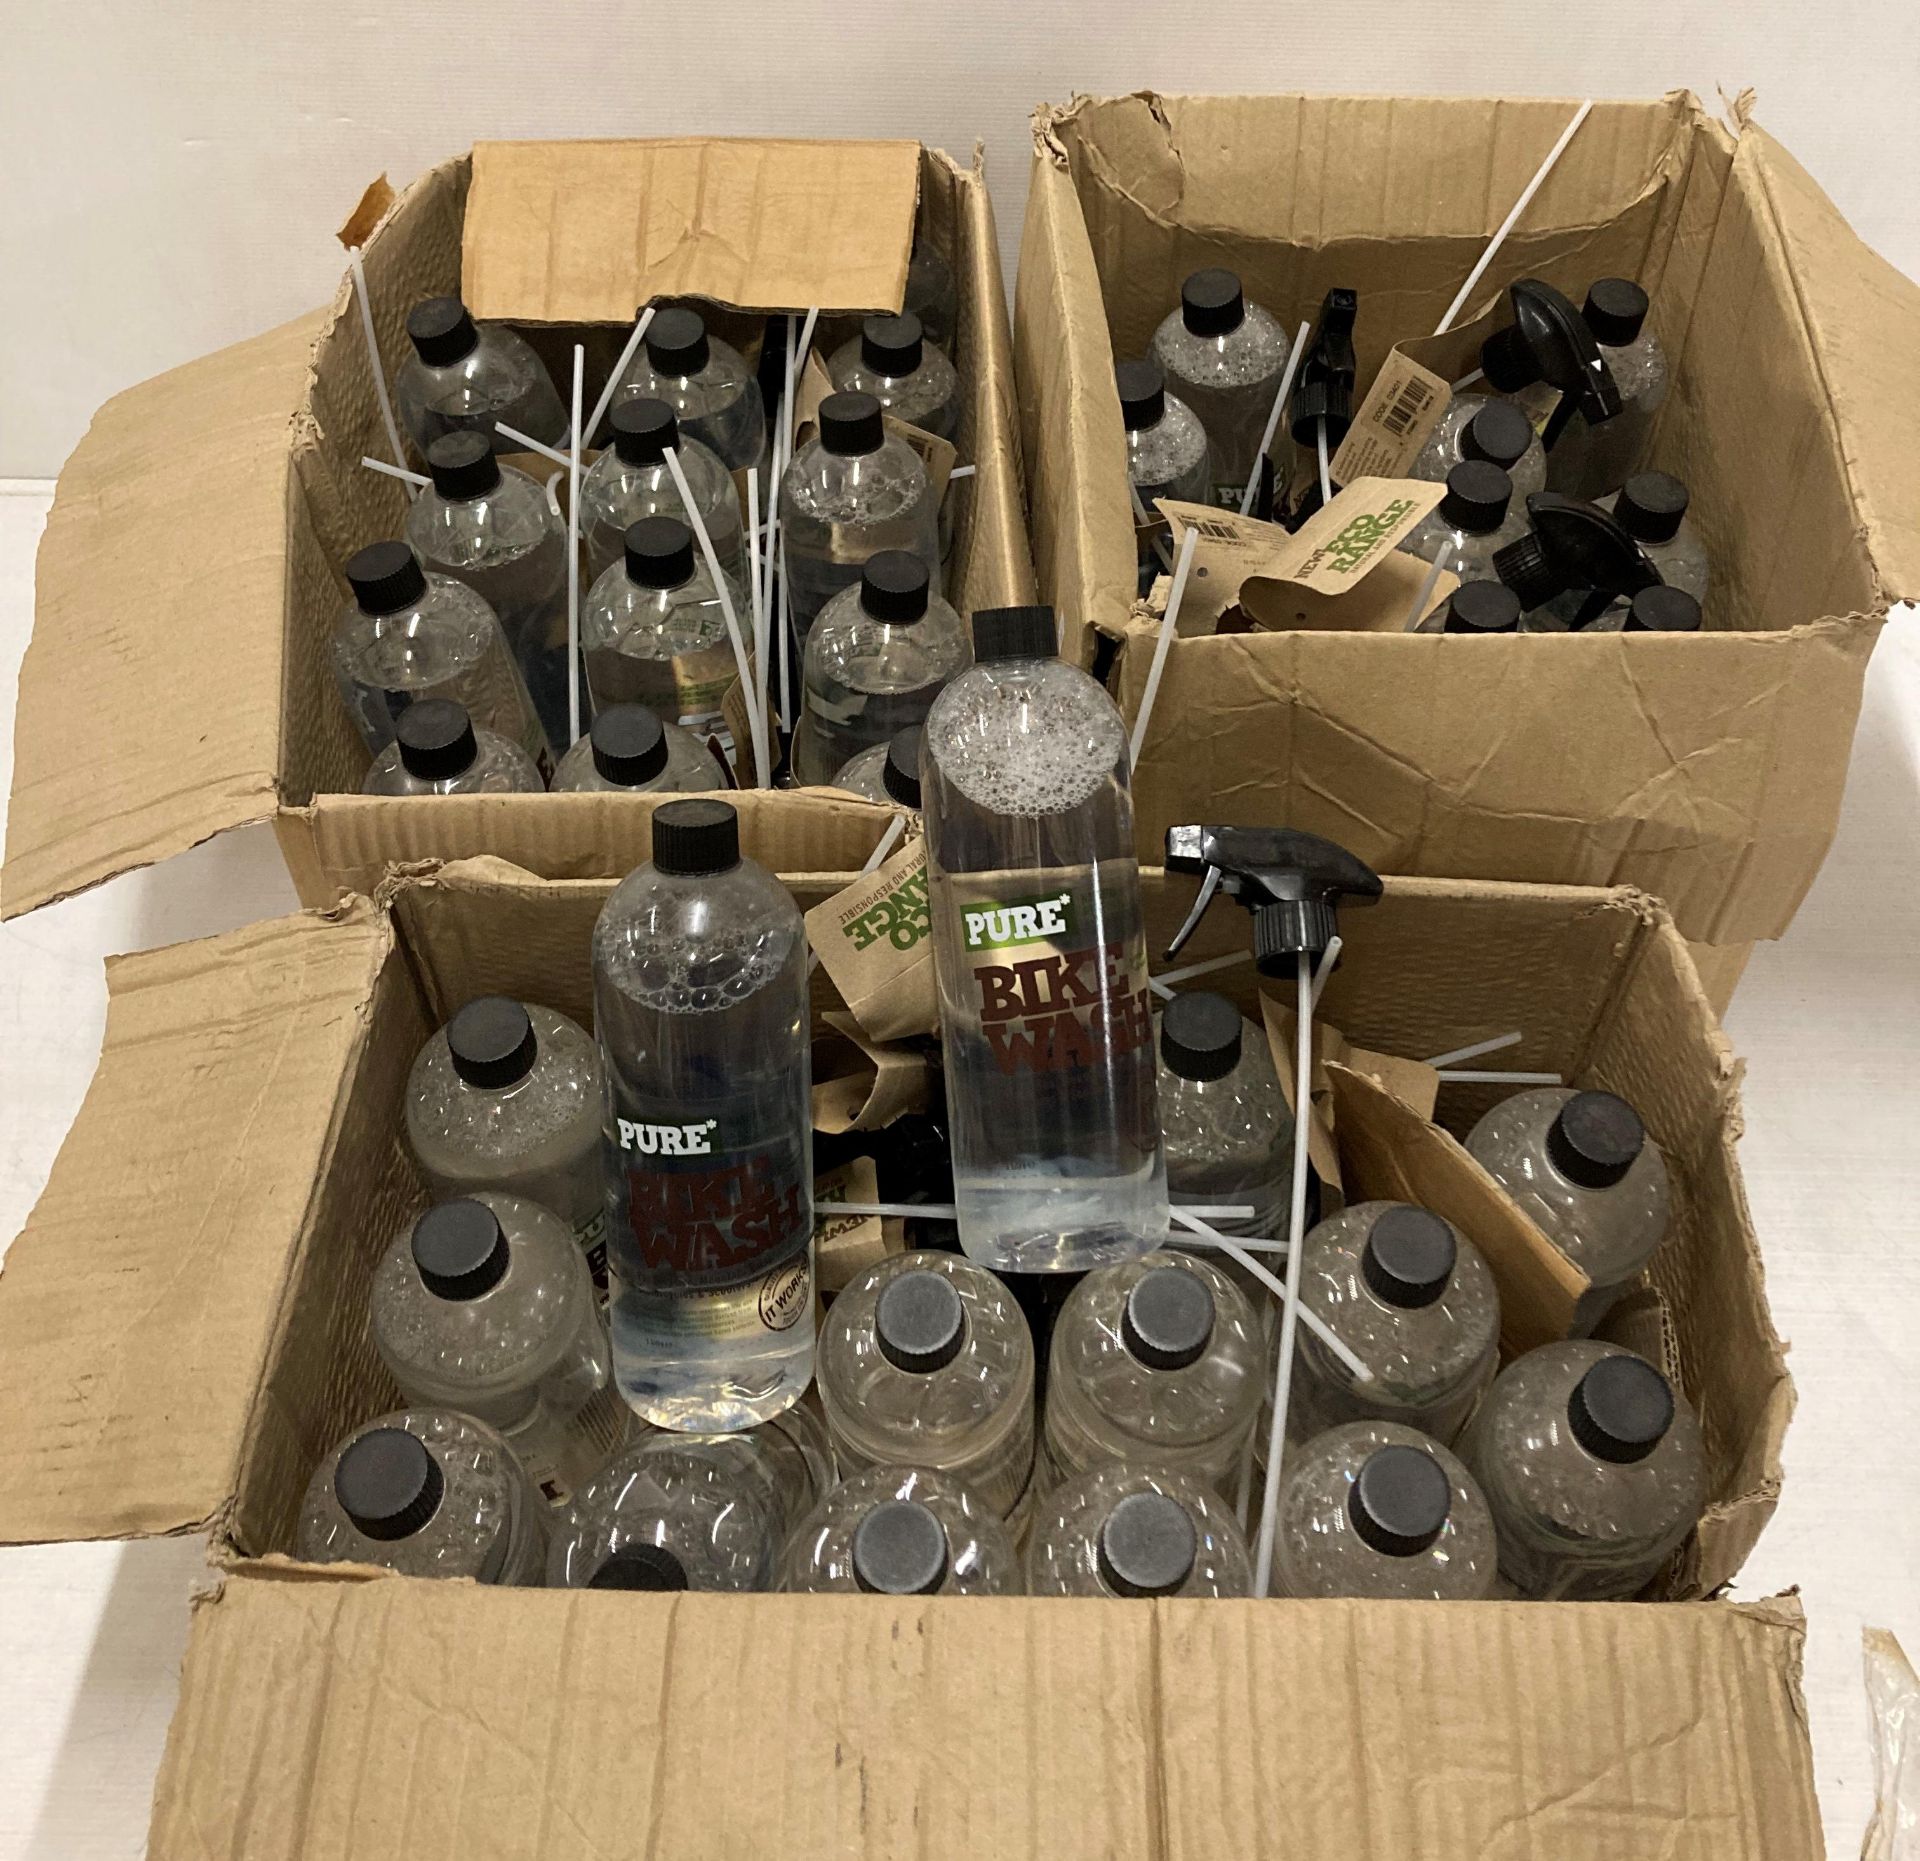 Contents to 3 x boxes - 41 x bottles of Pure Bike Wash (saleroom location: L06)